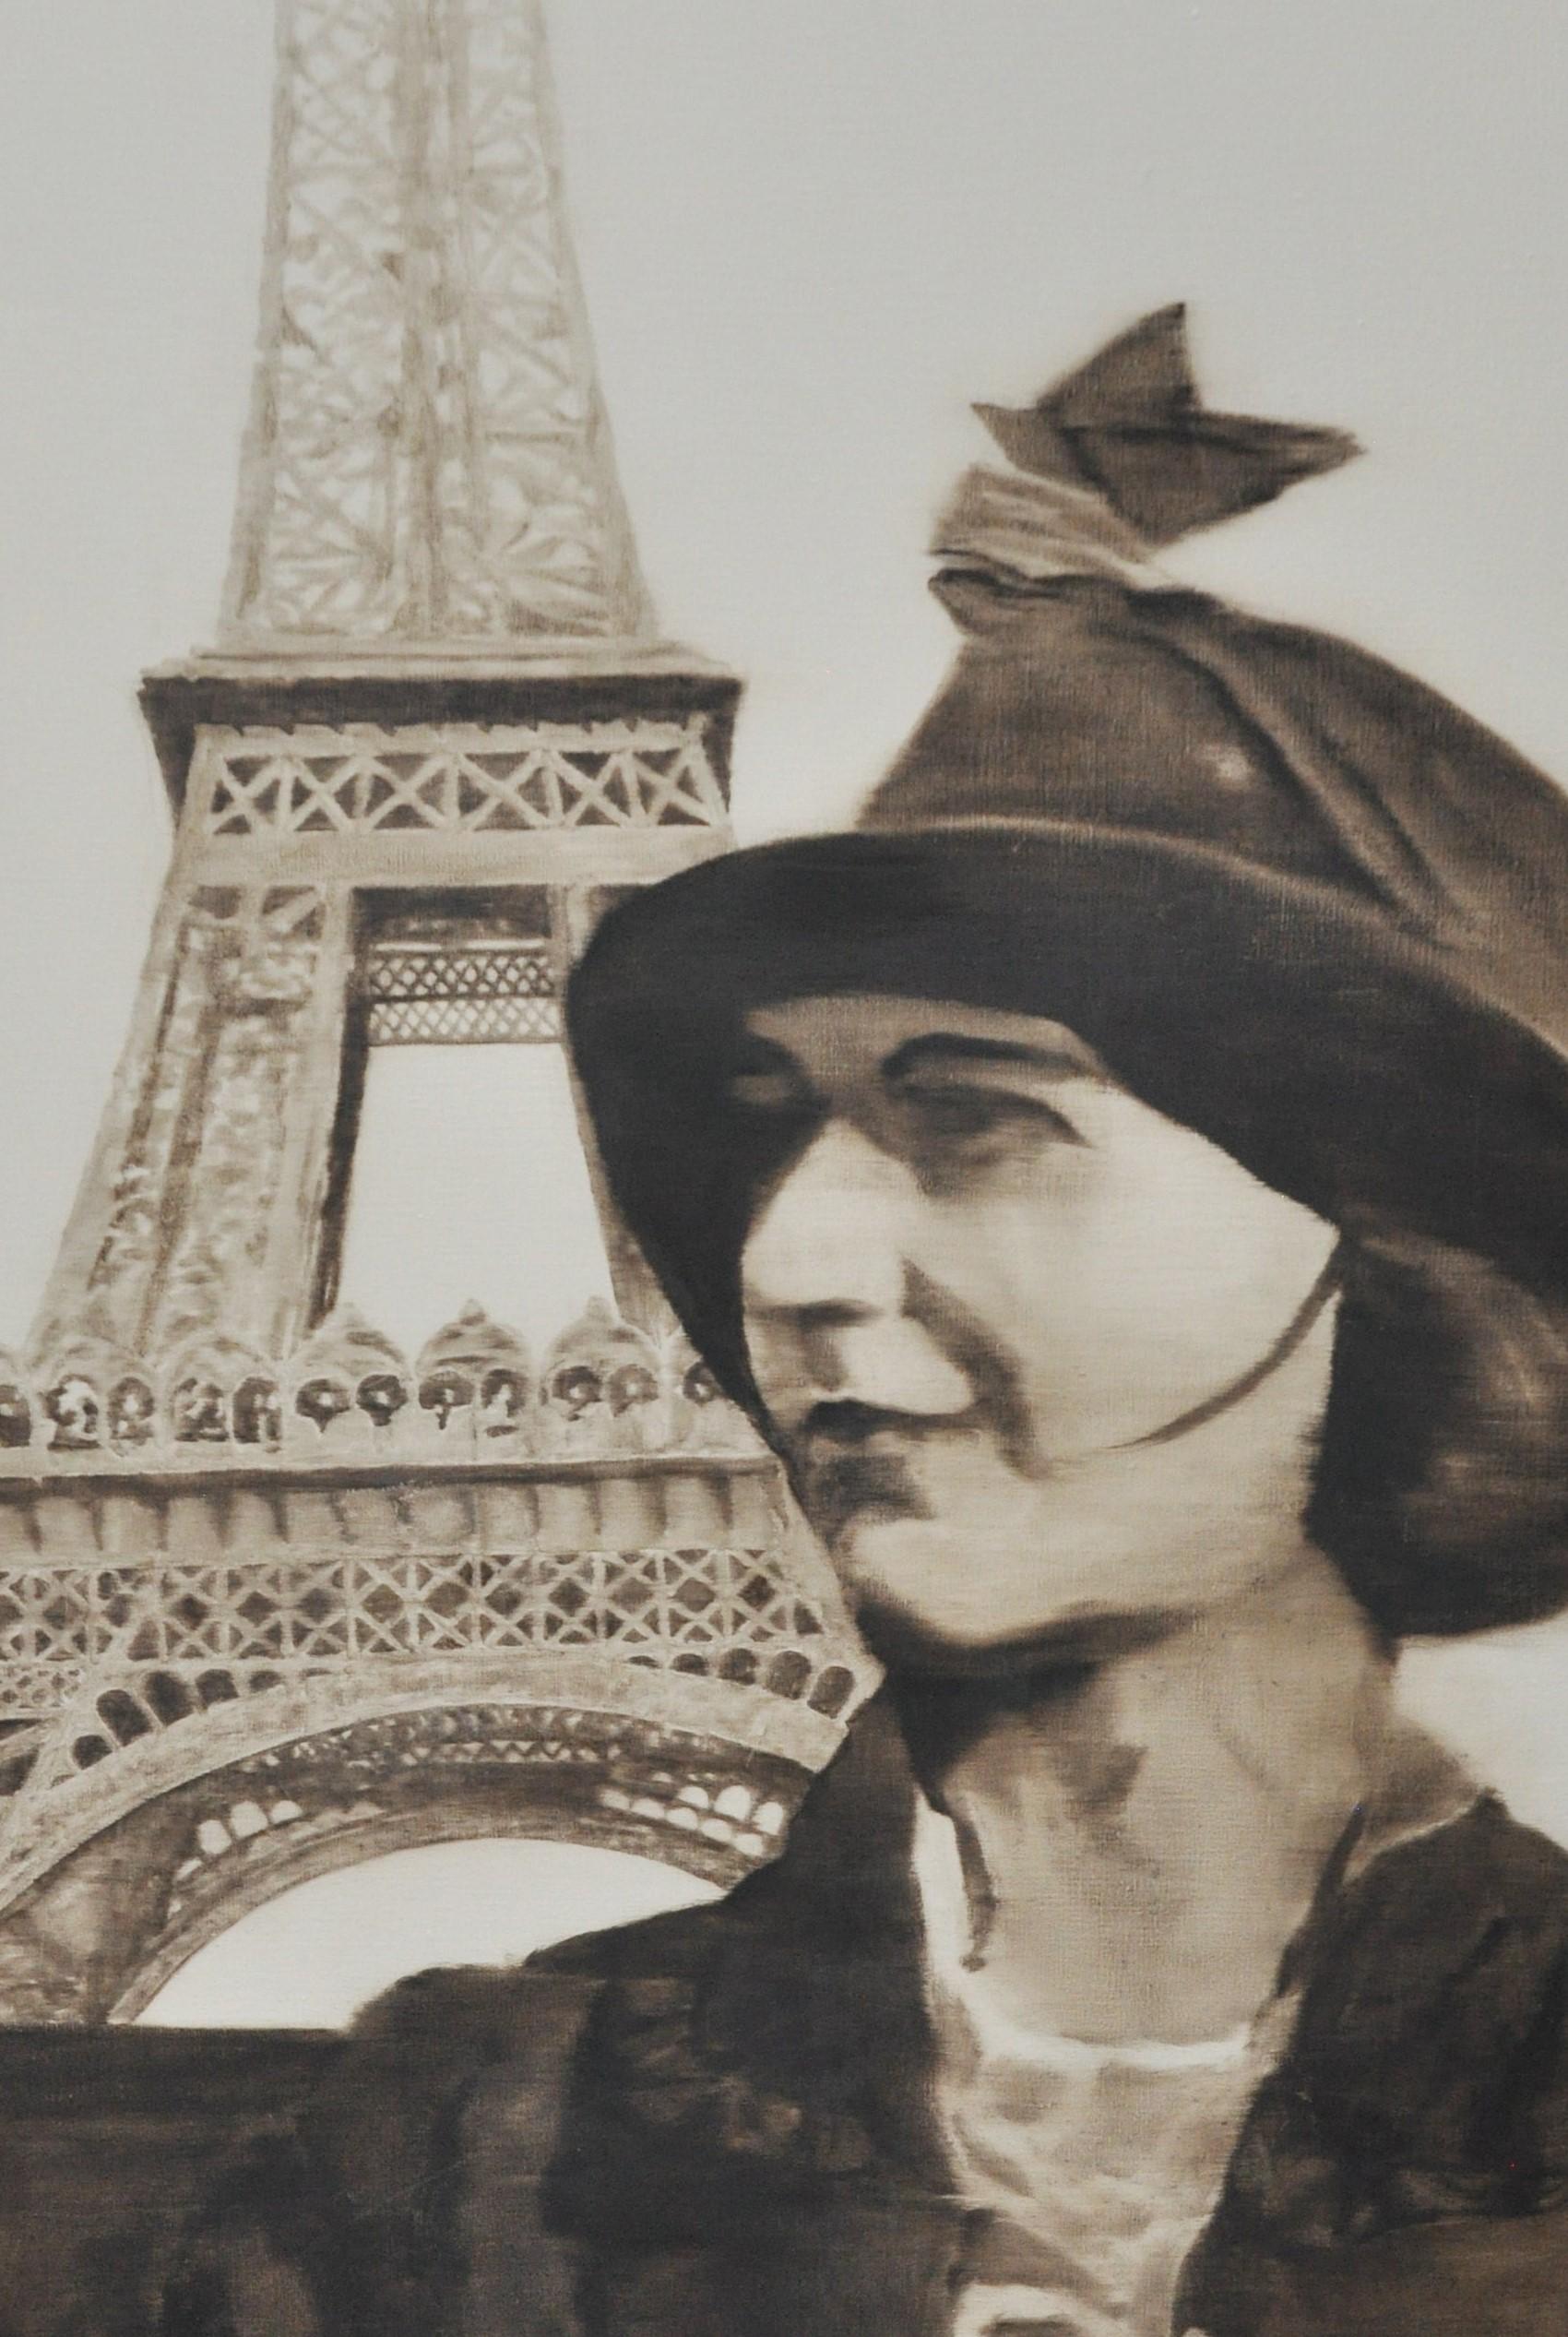 American Woman at the Eiffel Tower For Sale